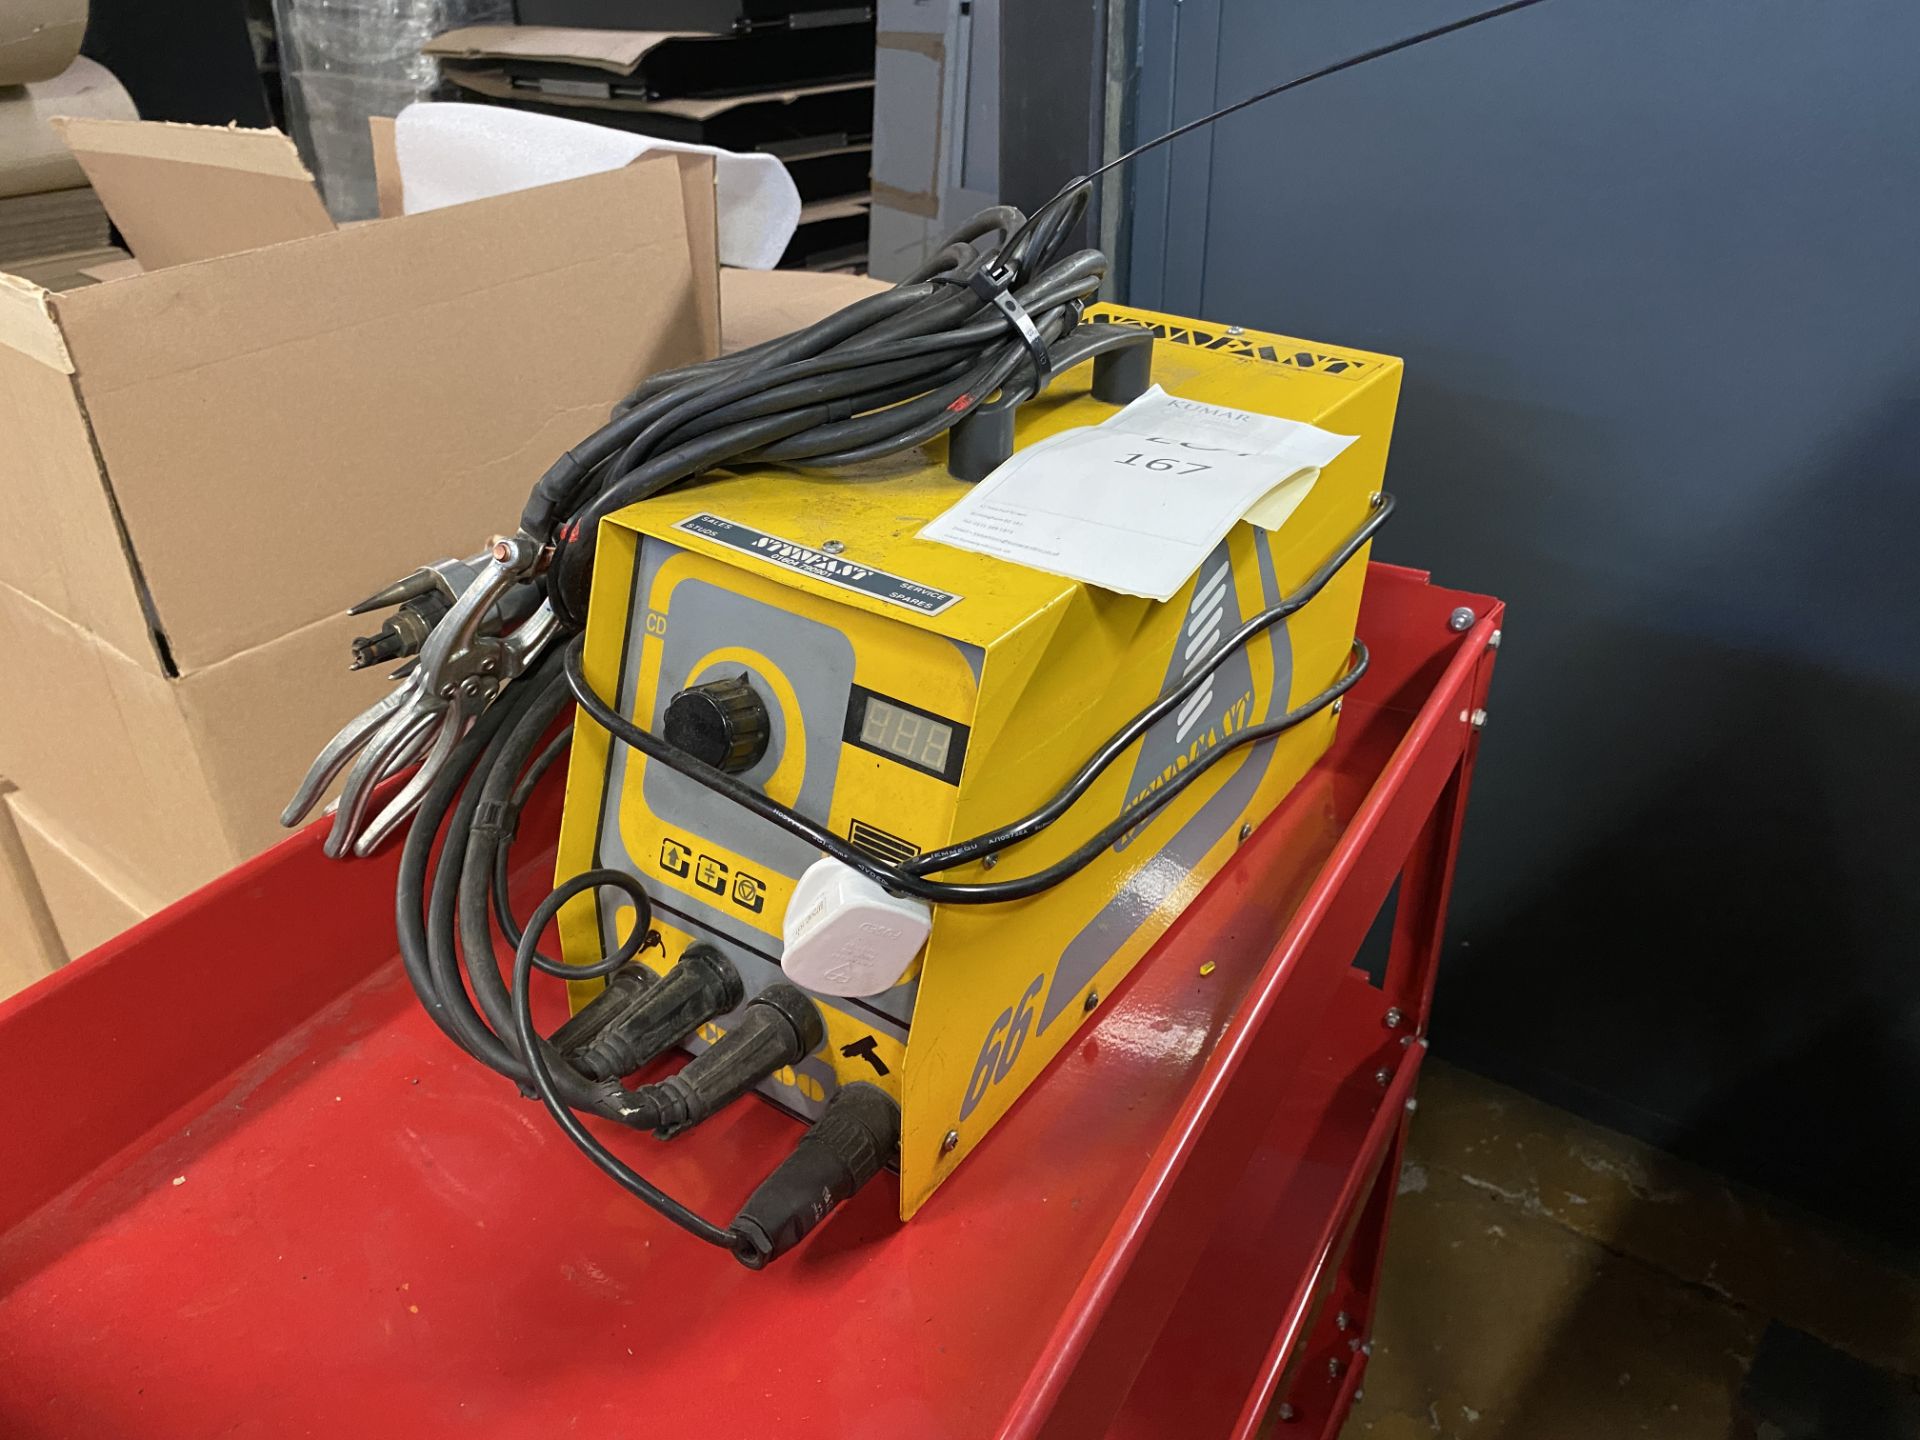 Taylor Stud Welding Systems Ltd, Studfast 66/1 Machine. Serial No: 200/2395/04 - Image 2 of 6